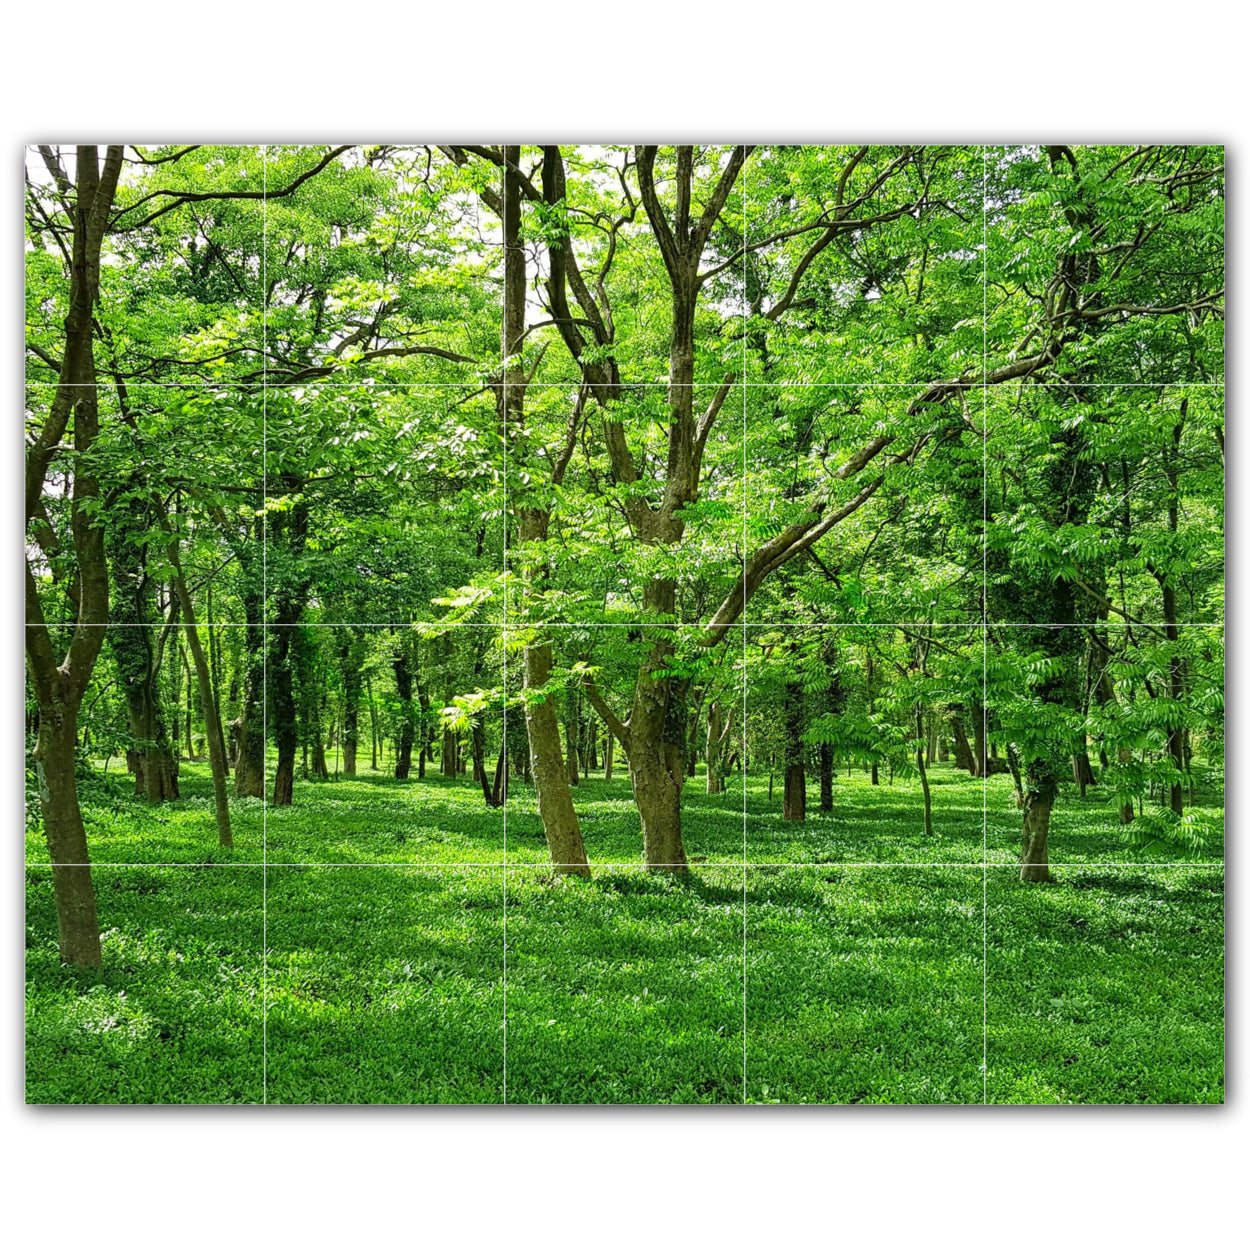 Tree Forest Photo Tile Murals